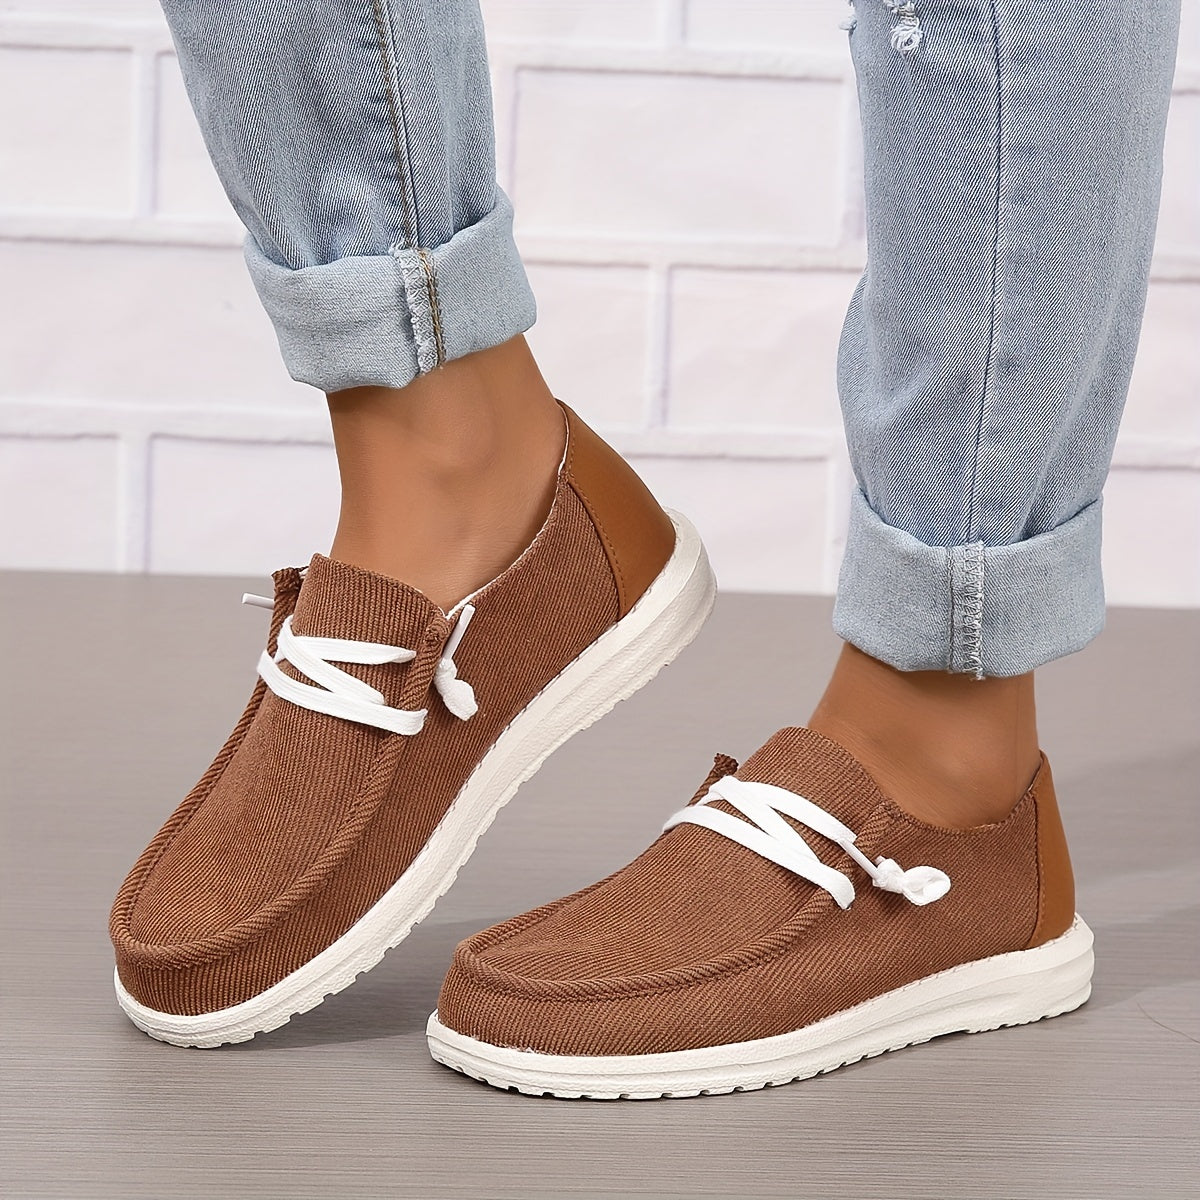 Women's Low Top Corduroy Shoes, Comfy Round Toe Low Top Slip On Shoes, Casual Flat Walking Loafers